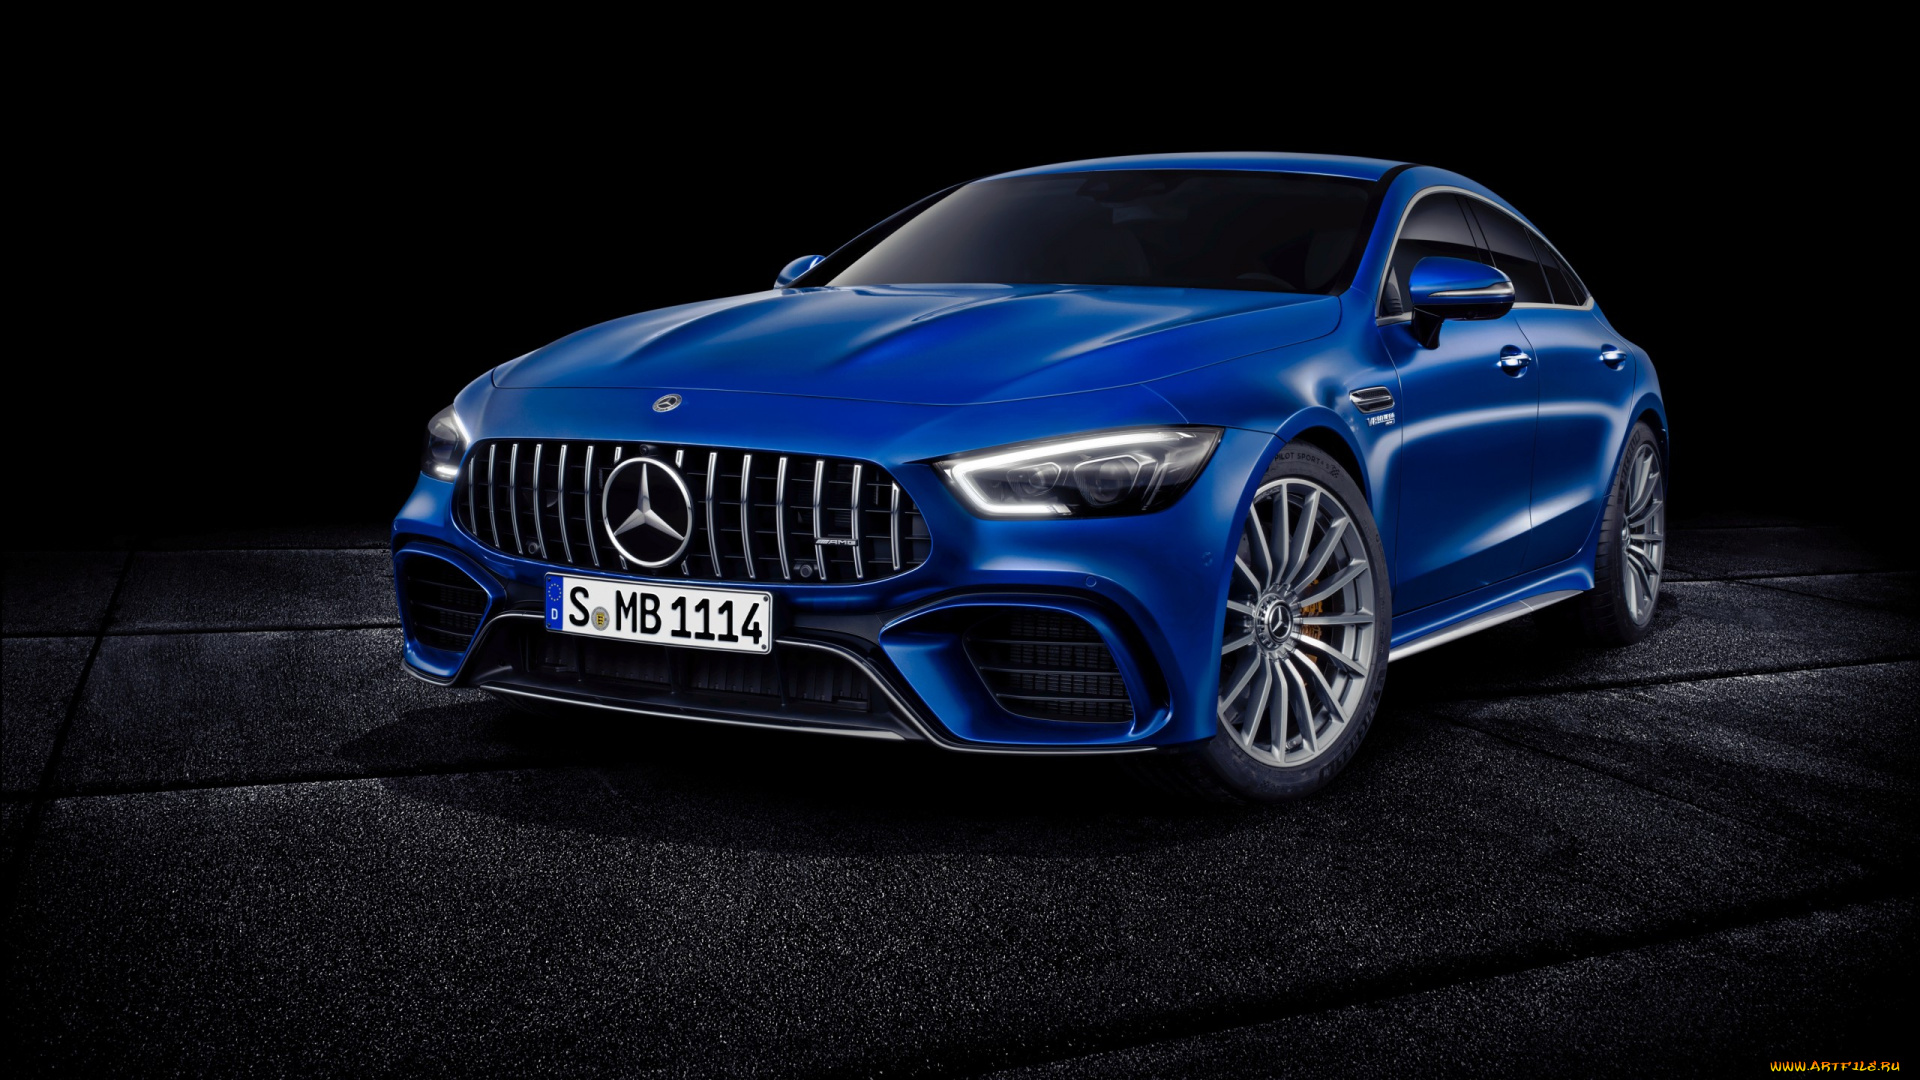 2018, mercedes, amg, gt, 63, s, 4matic, 4door, coupe, автомобили, mercedes-benz, мерседес, синий, coupe, 4door, s, 4matic, gt63, amg, mercedes, 2018